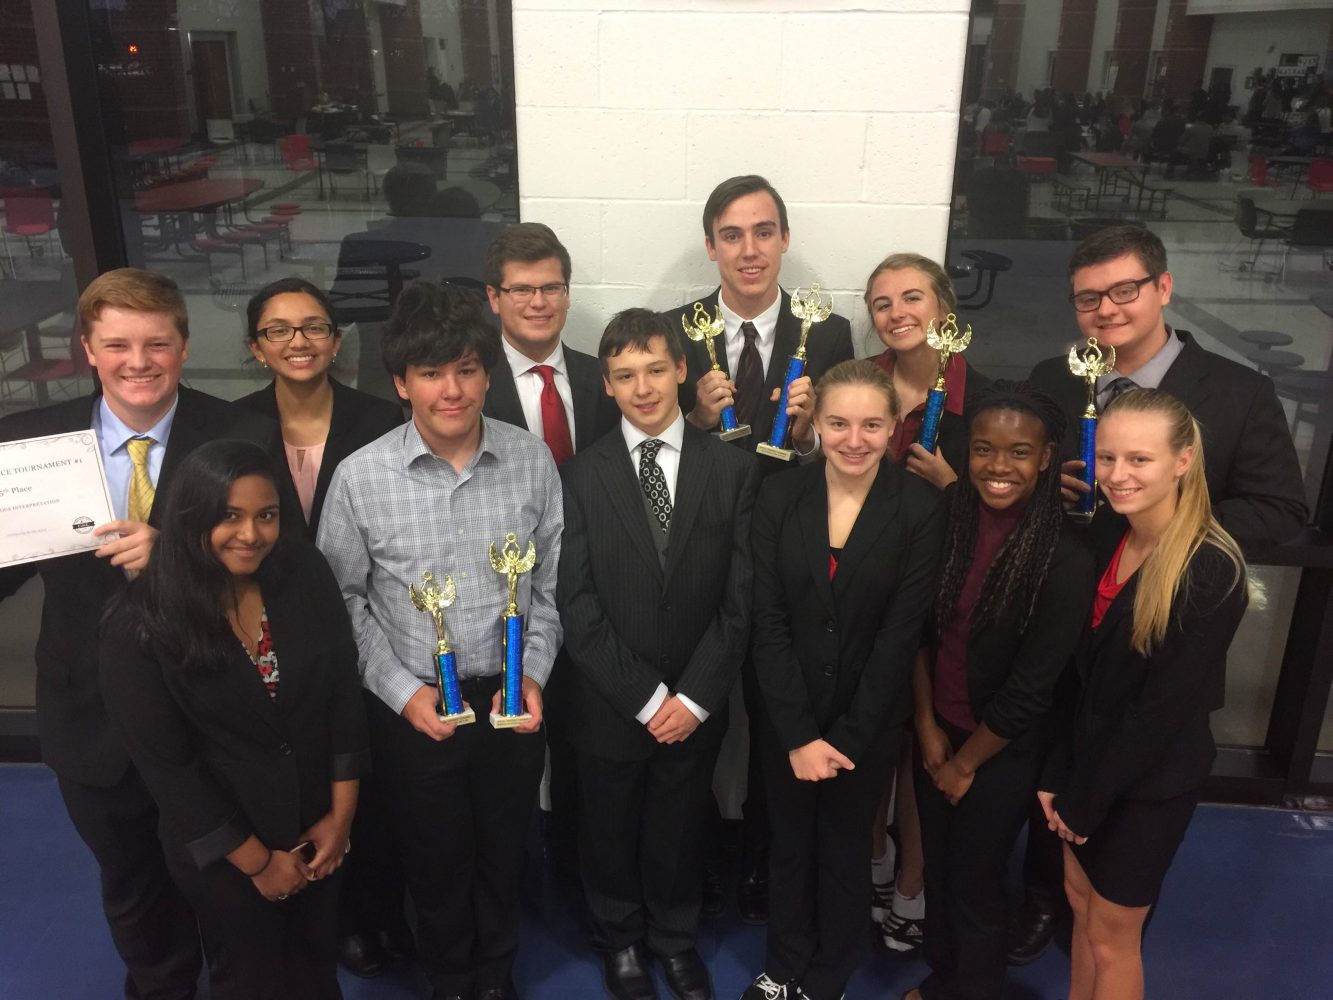 Second Speech and Debate Competition on Oct. 21 and 22